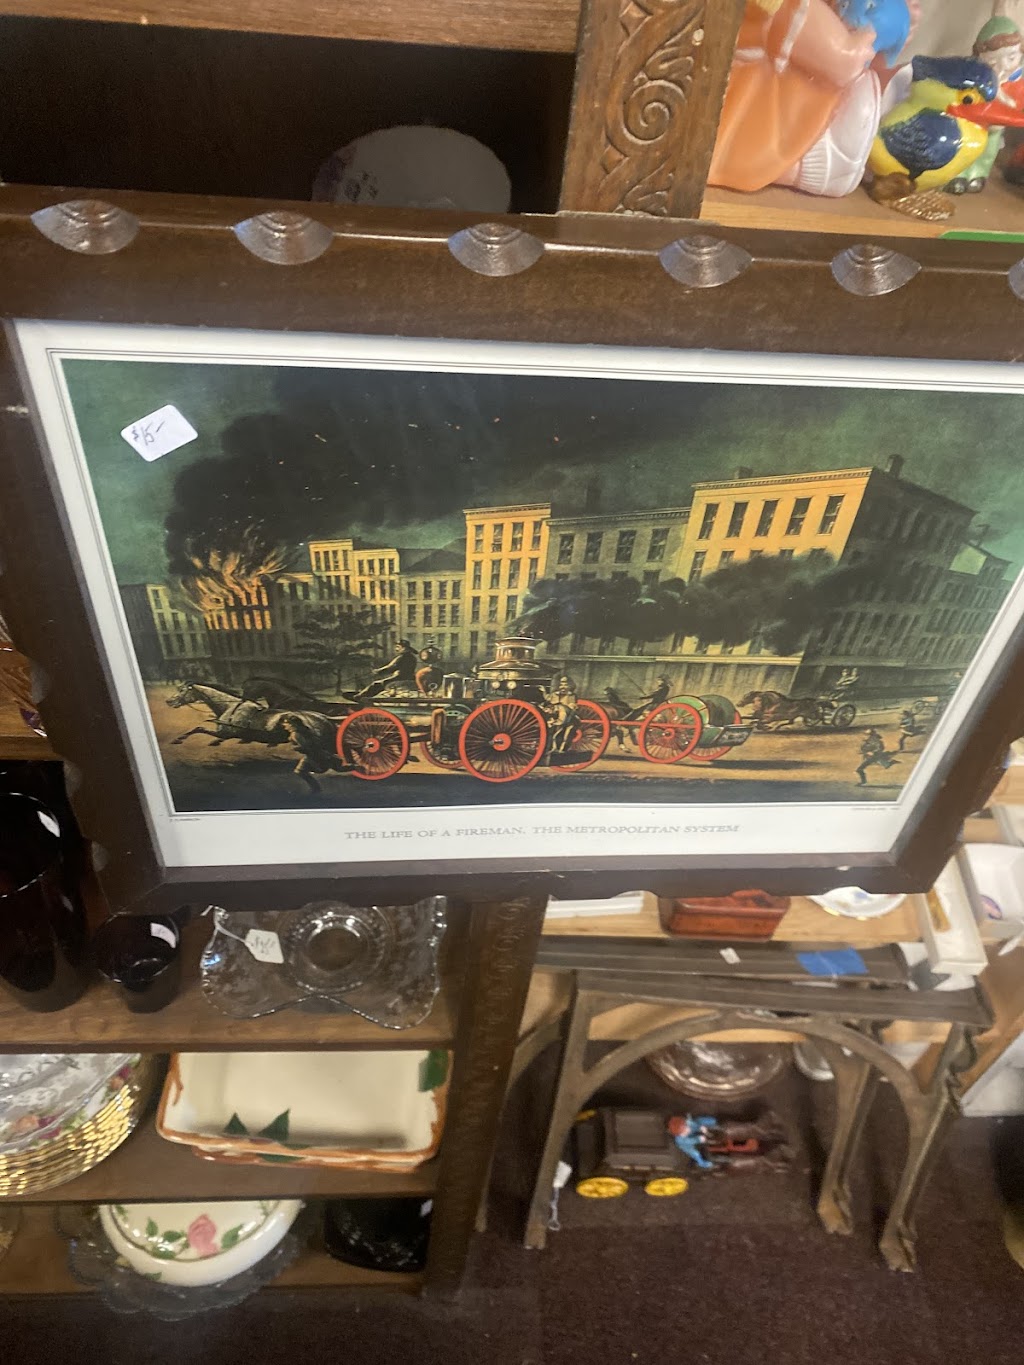 Grant City Antiques | 1144 S Railroad Ave, Staten Island, NY 10306 | Phone: (646) 241-5456